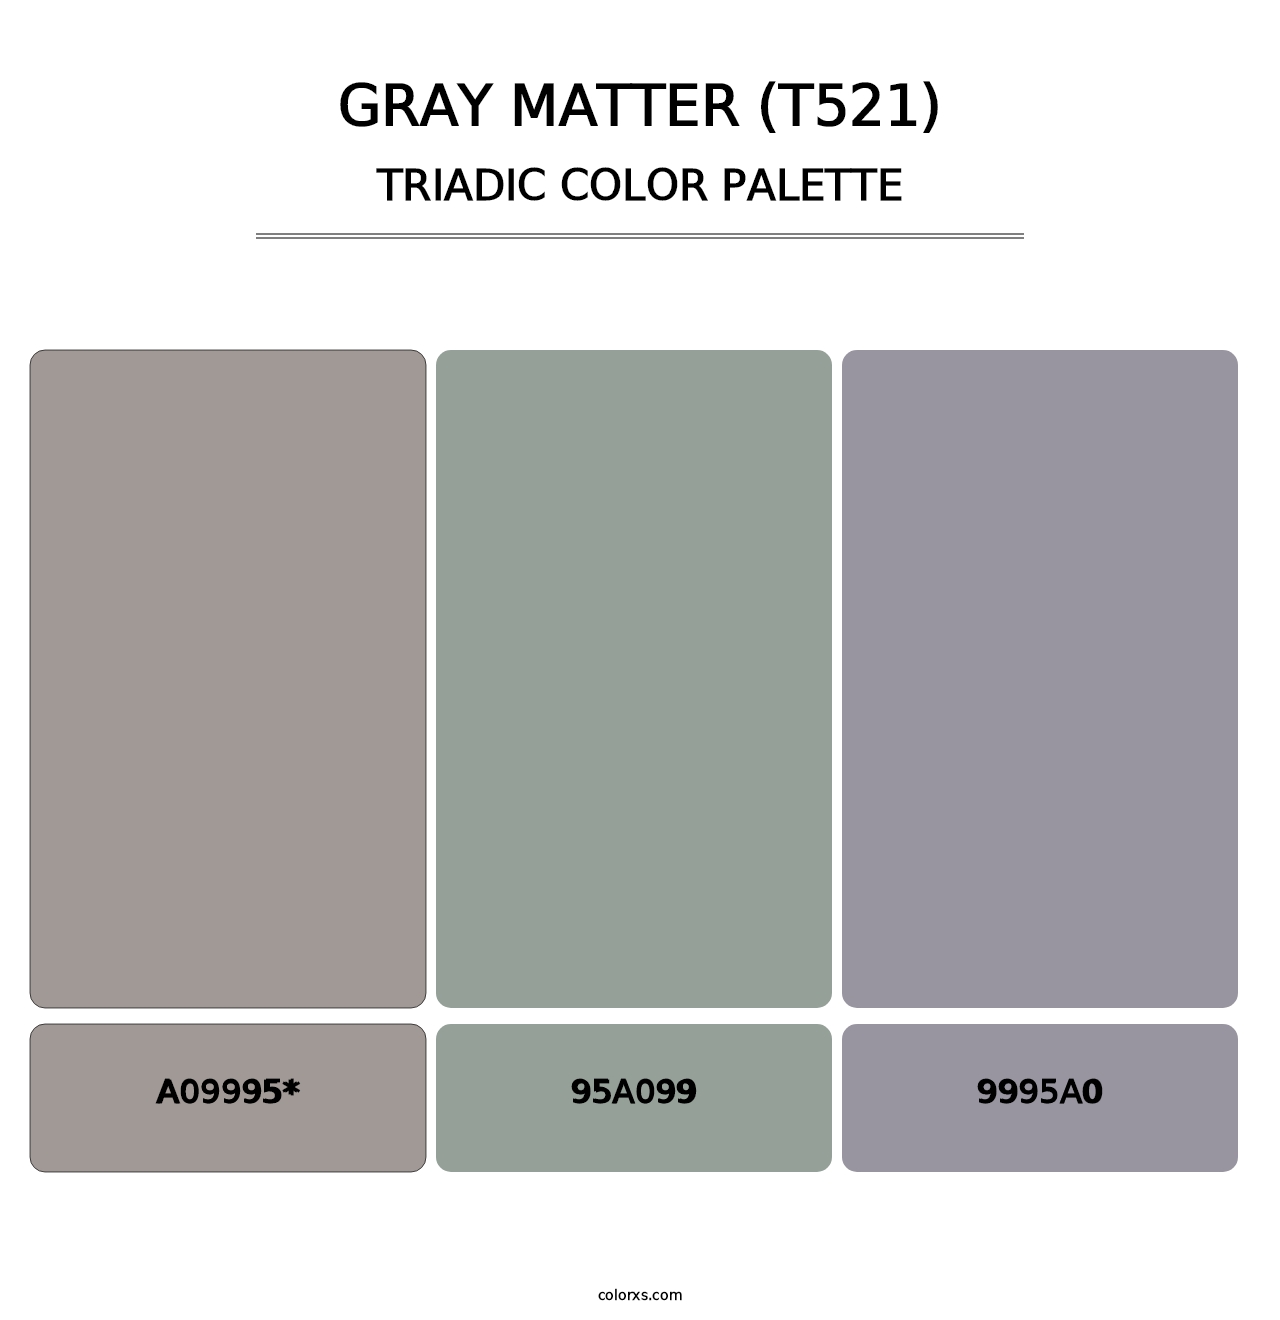 Gray Matter (T521) - Triadic Color Palette